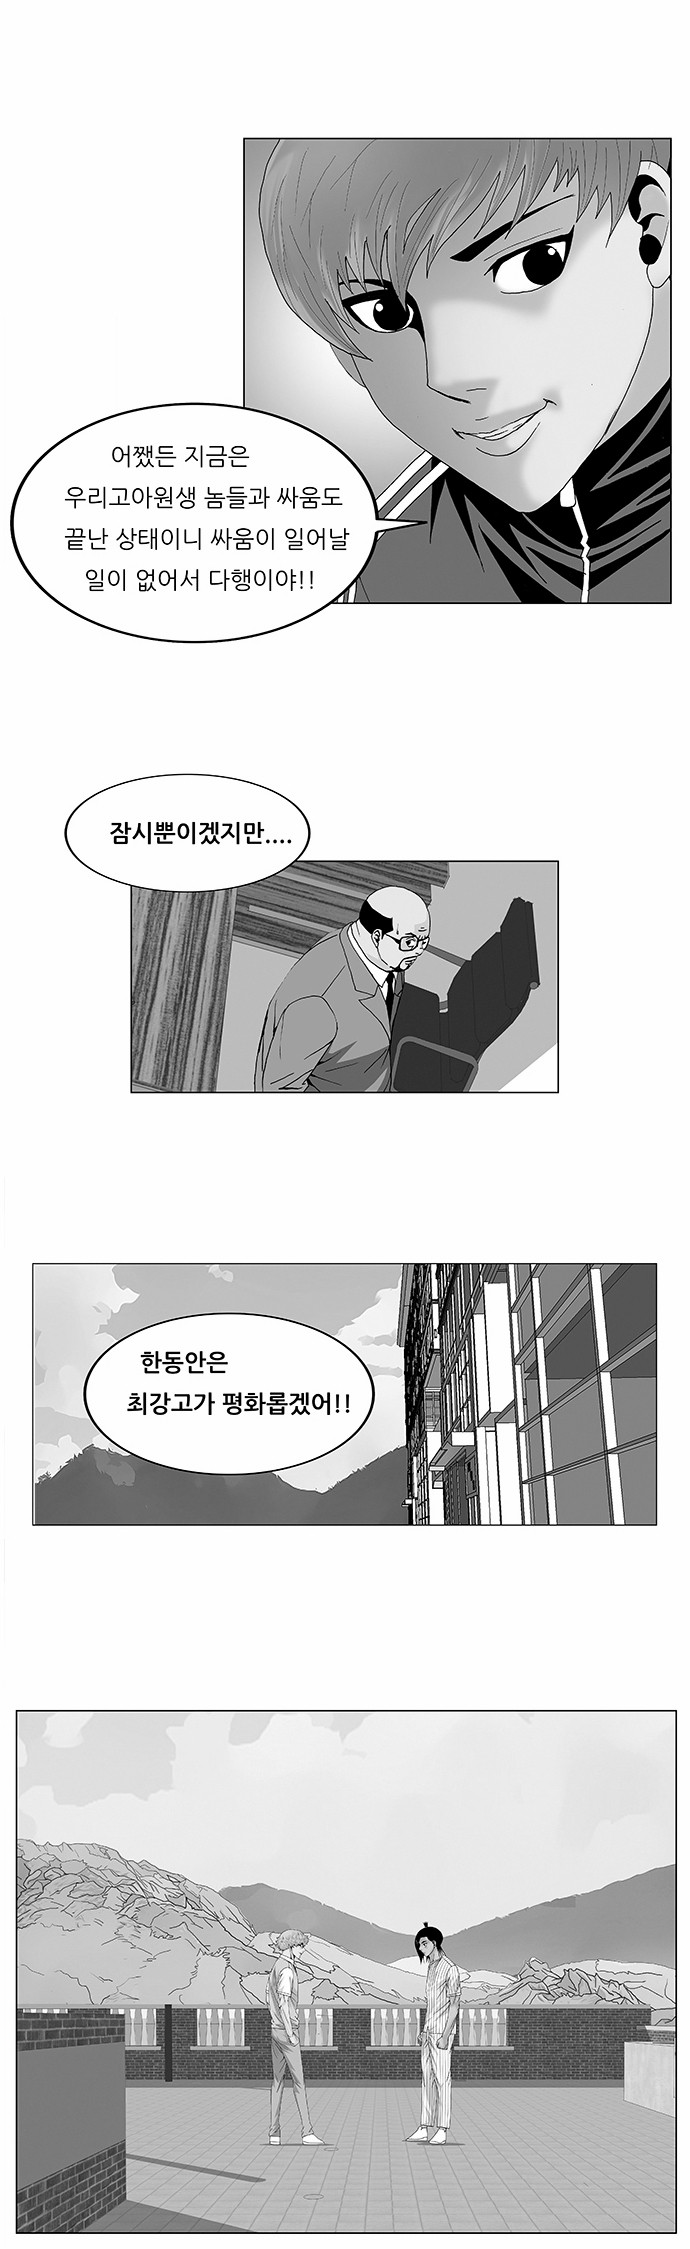 Ultimate Legend - Kang Hae Hyo - Chapter 101 - Page 1